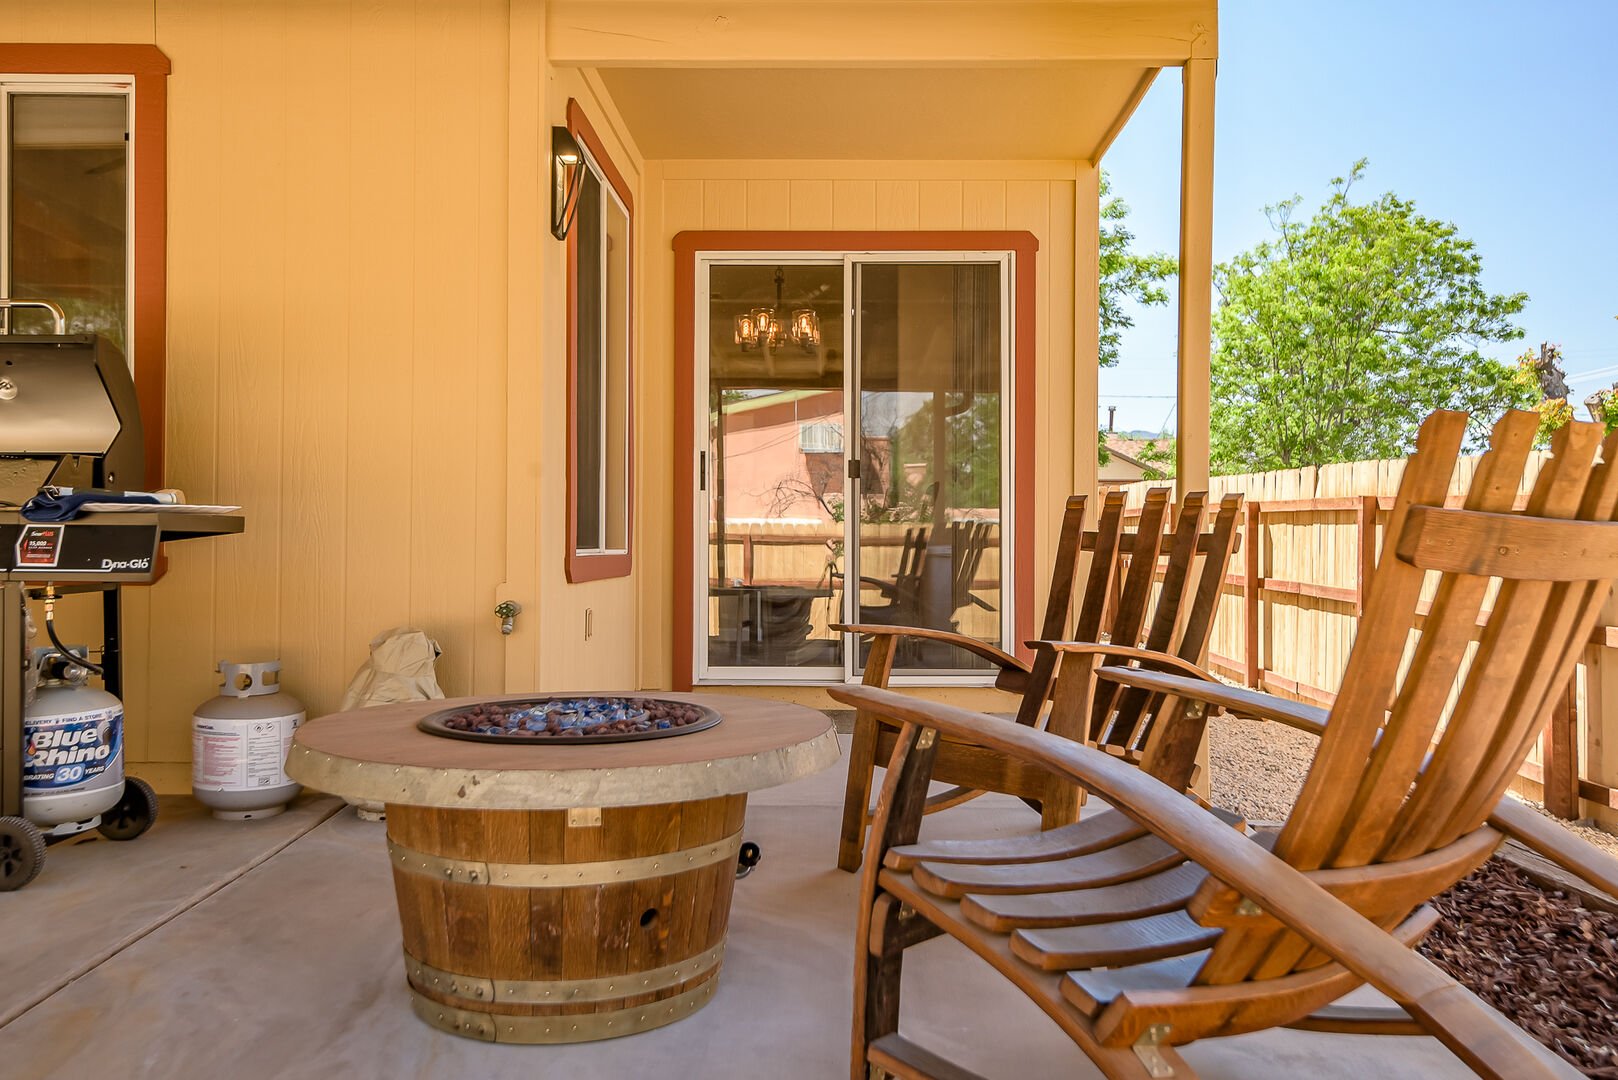 Relax by the custom-made fire pit and chairs crafted from wine barrels